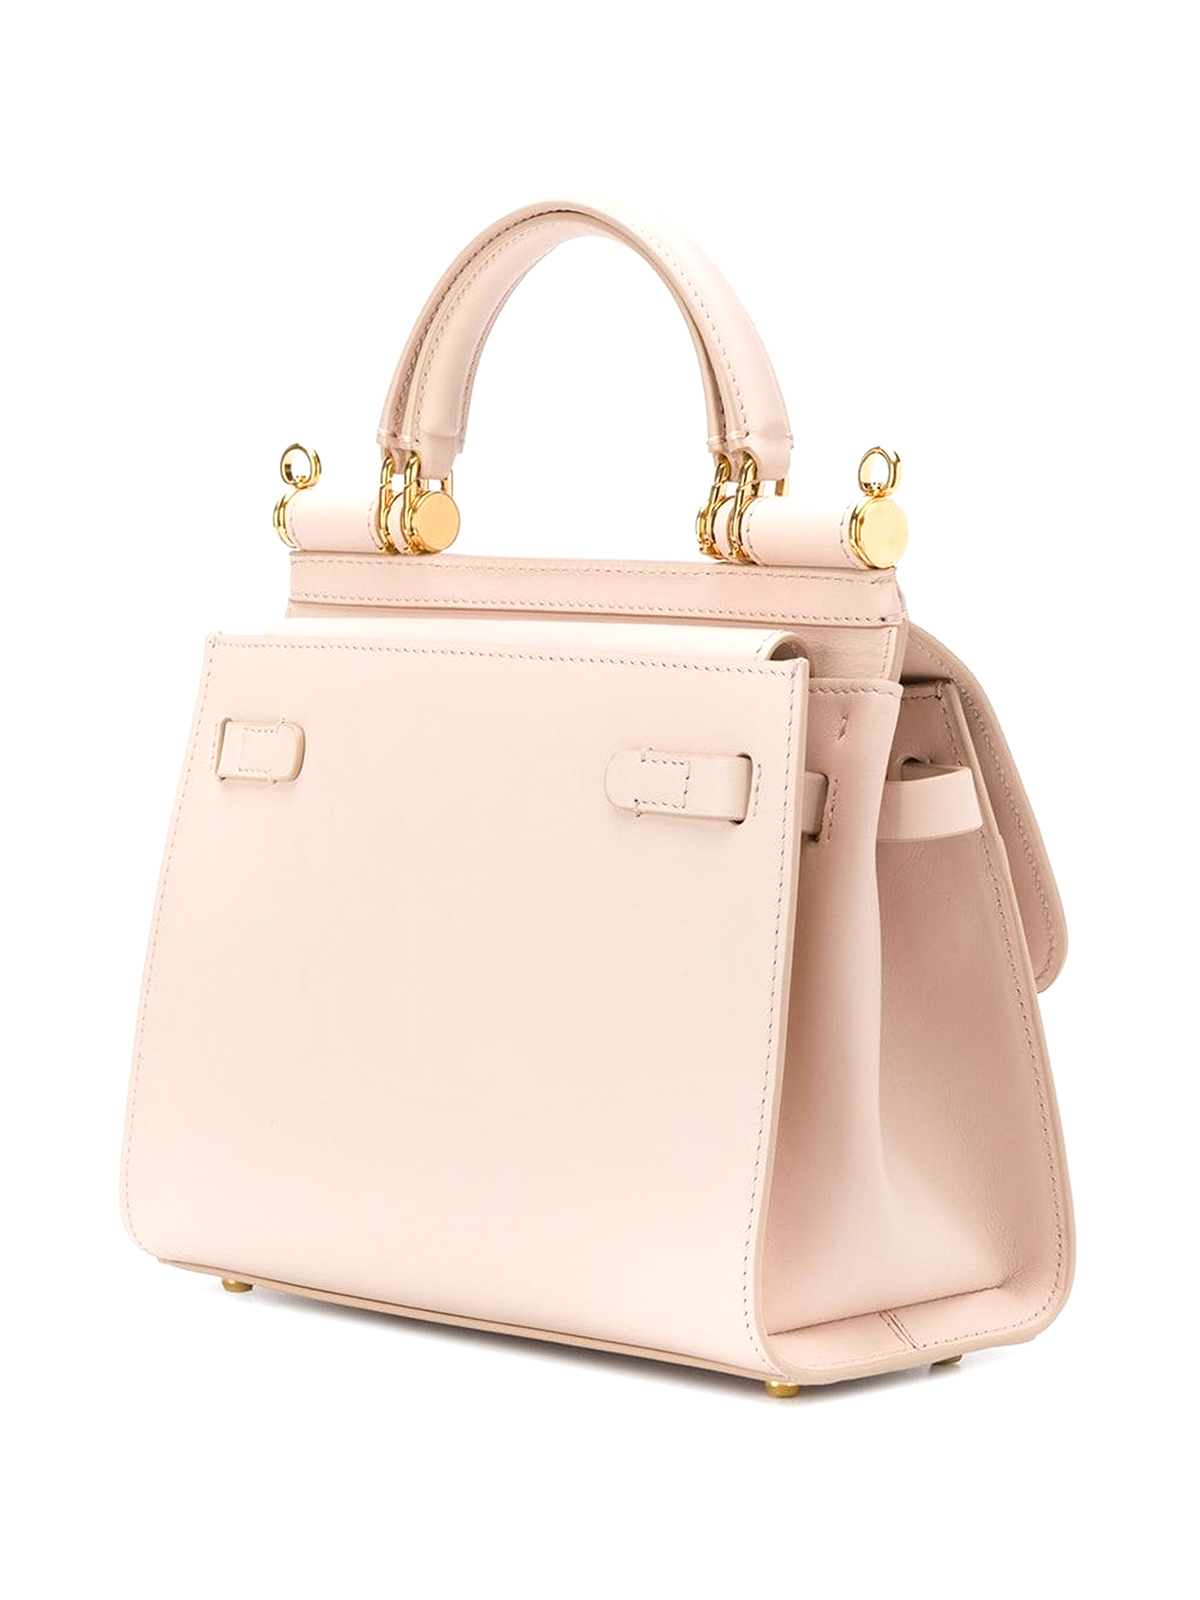 Bowling bags Dolce & Gabbana - Sicily 58 small pink leather bag 